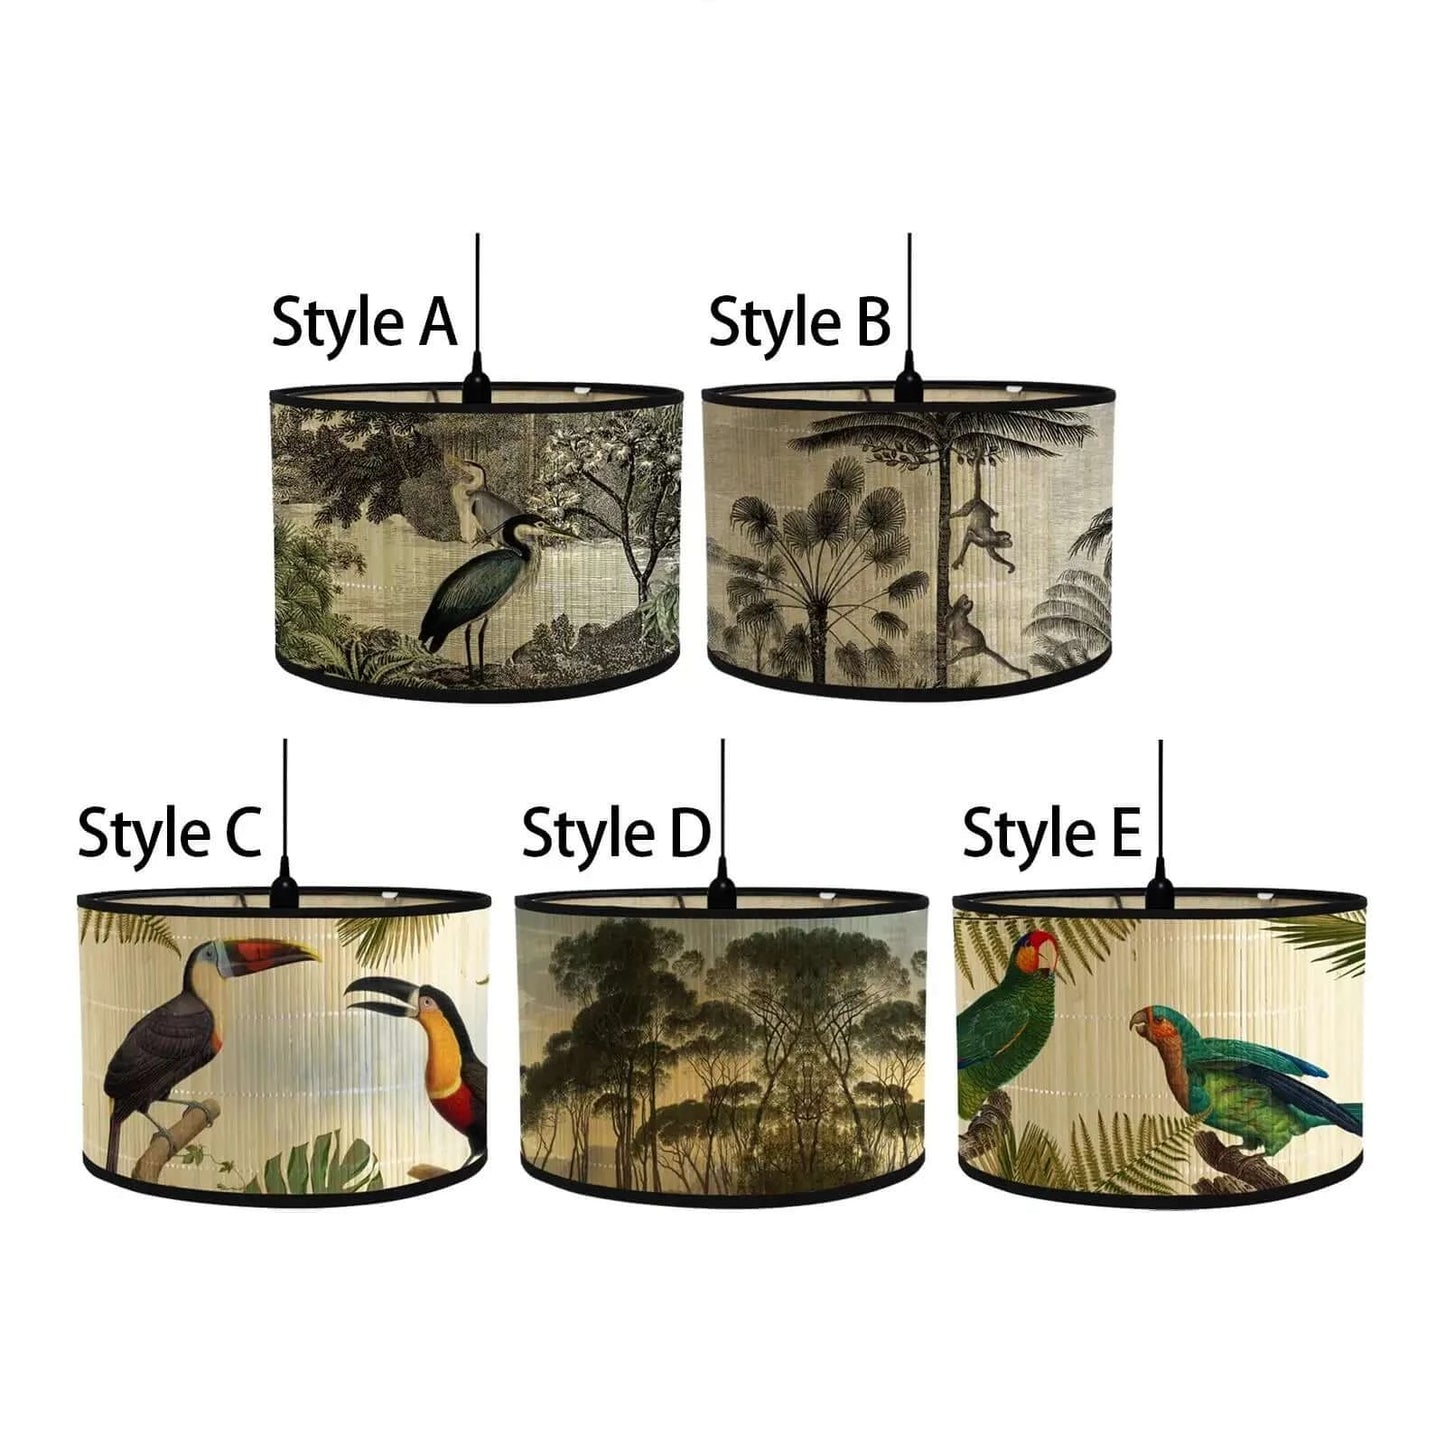 Drum Shaped Bamboo Lampshade with Exotic Prints